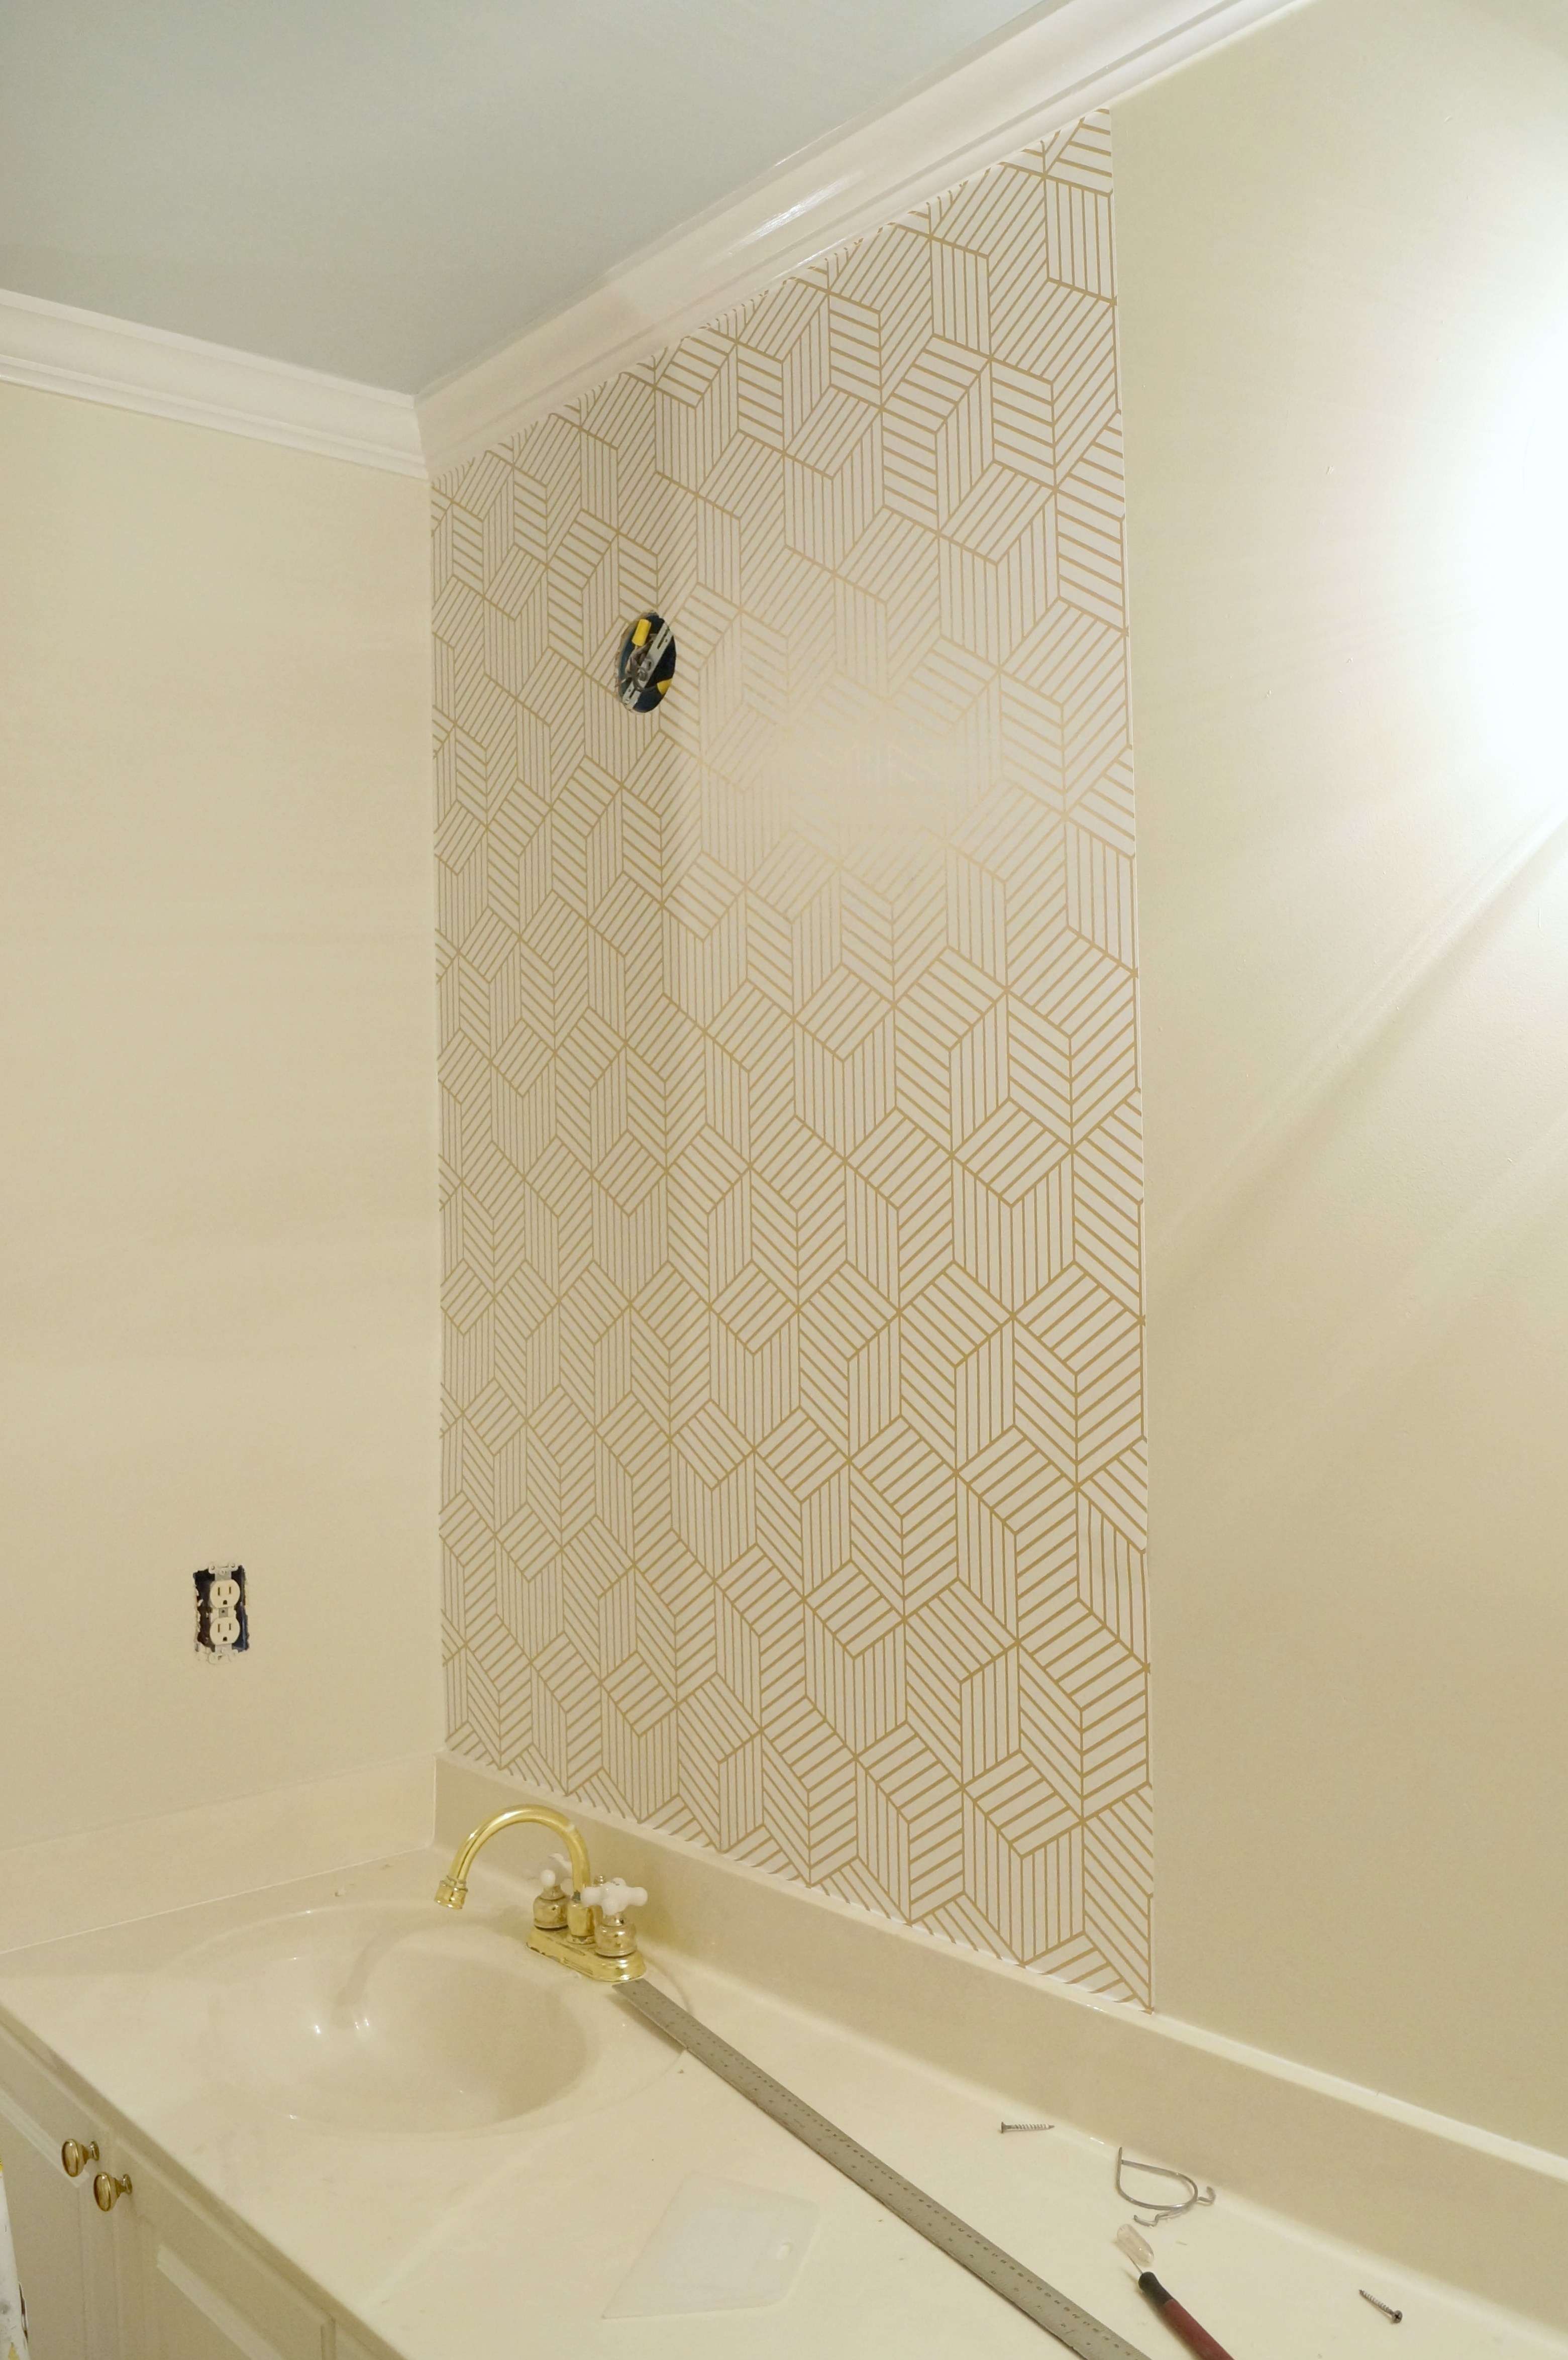 For The All Behind The Vanity I Used A Stripped Hexagon - Bathroom , HD Wallpaper & Backgrounds